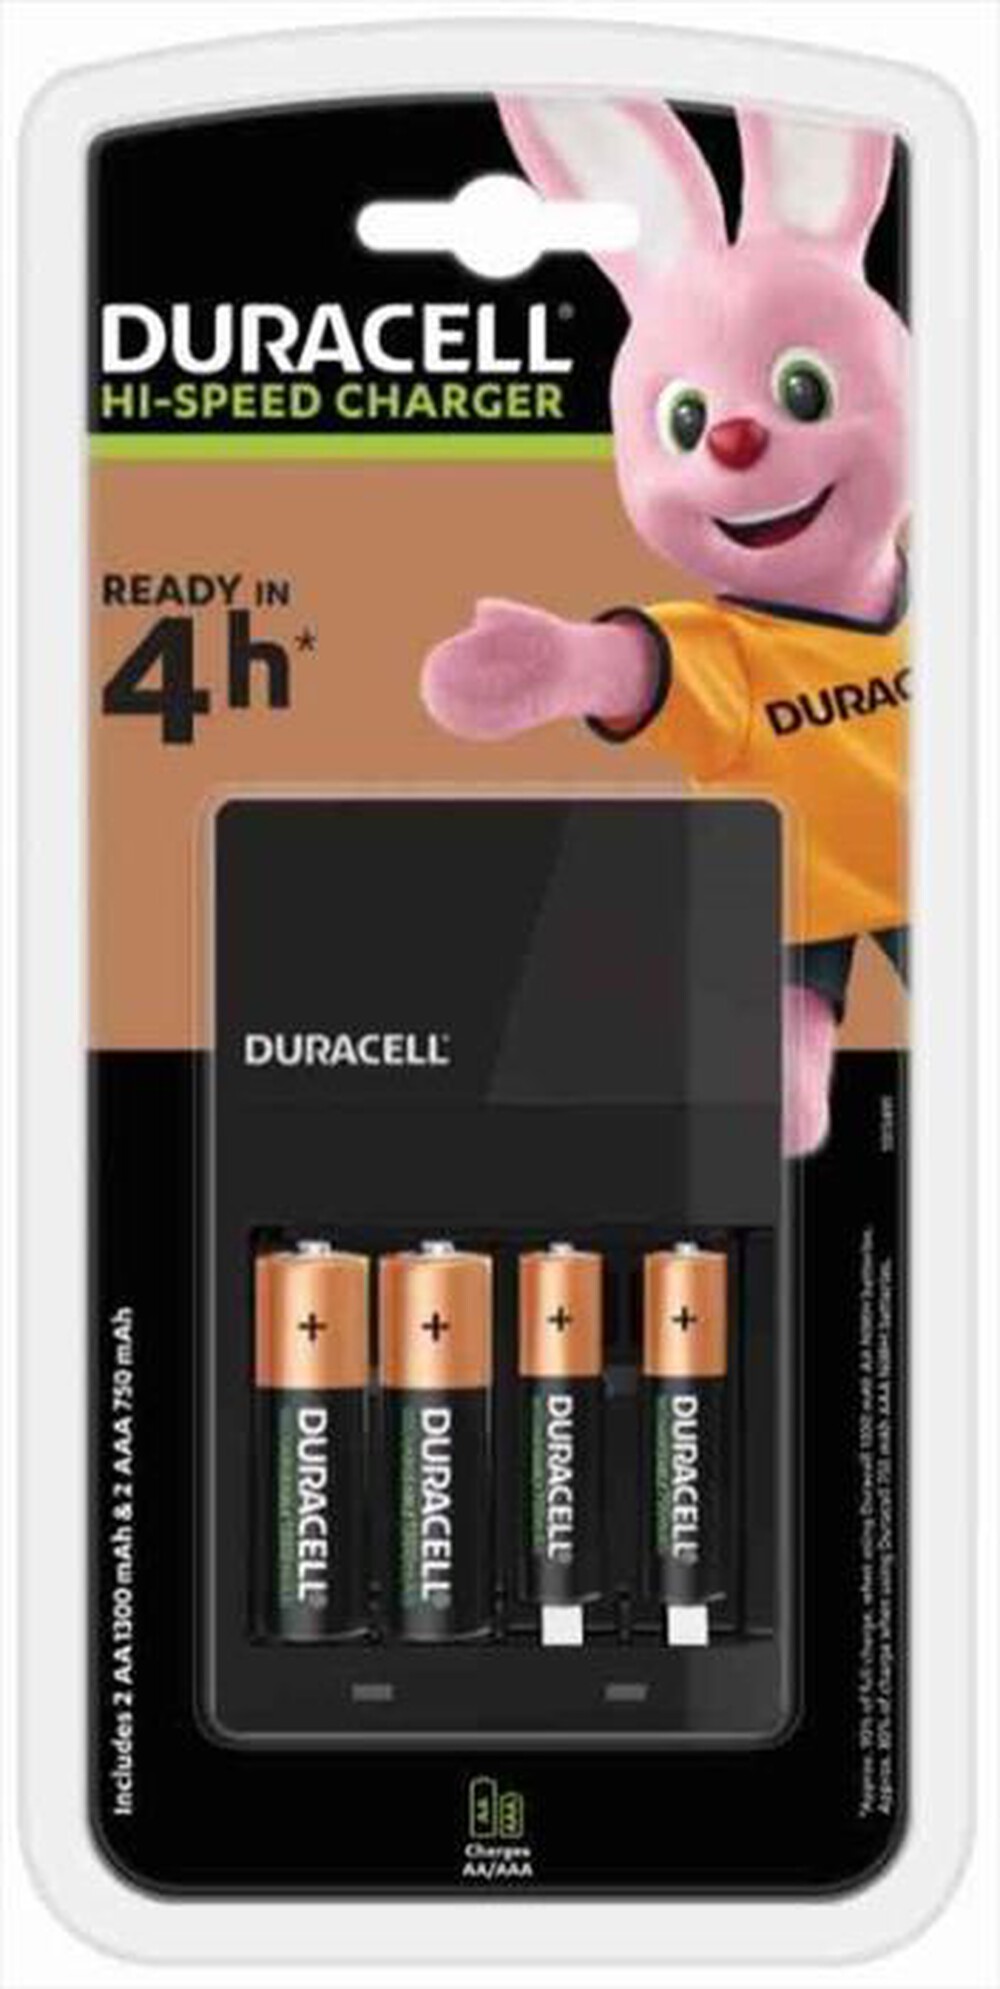 "DURACELL - CHARGER CEF 14 - "